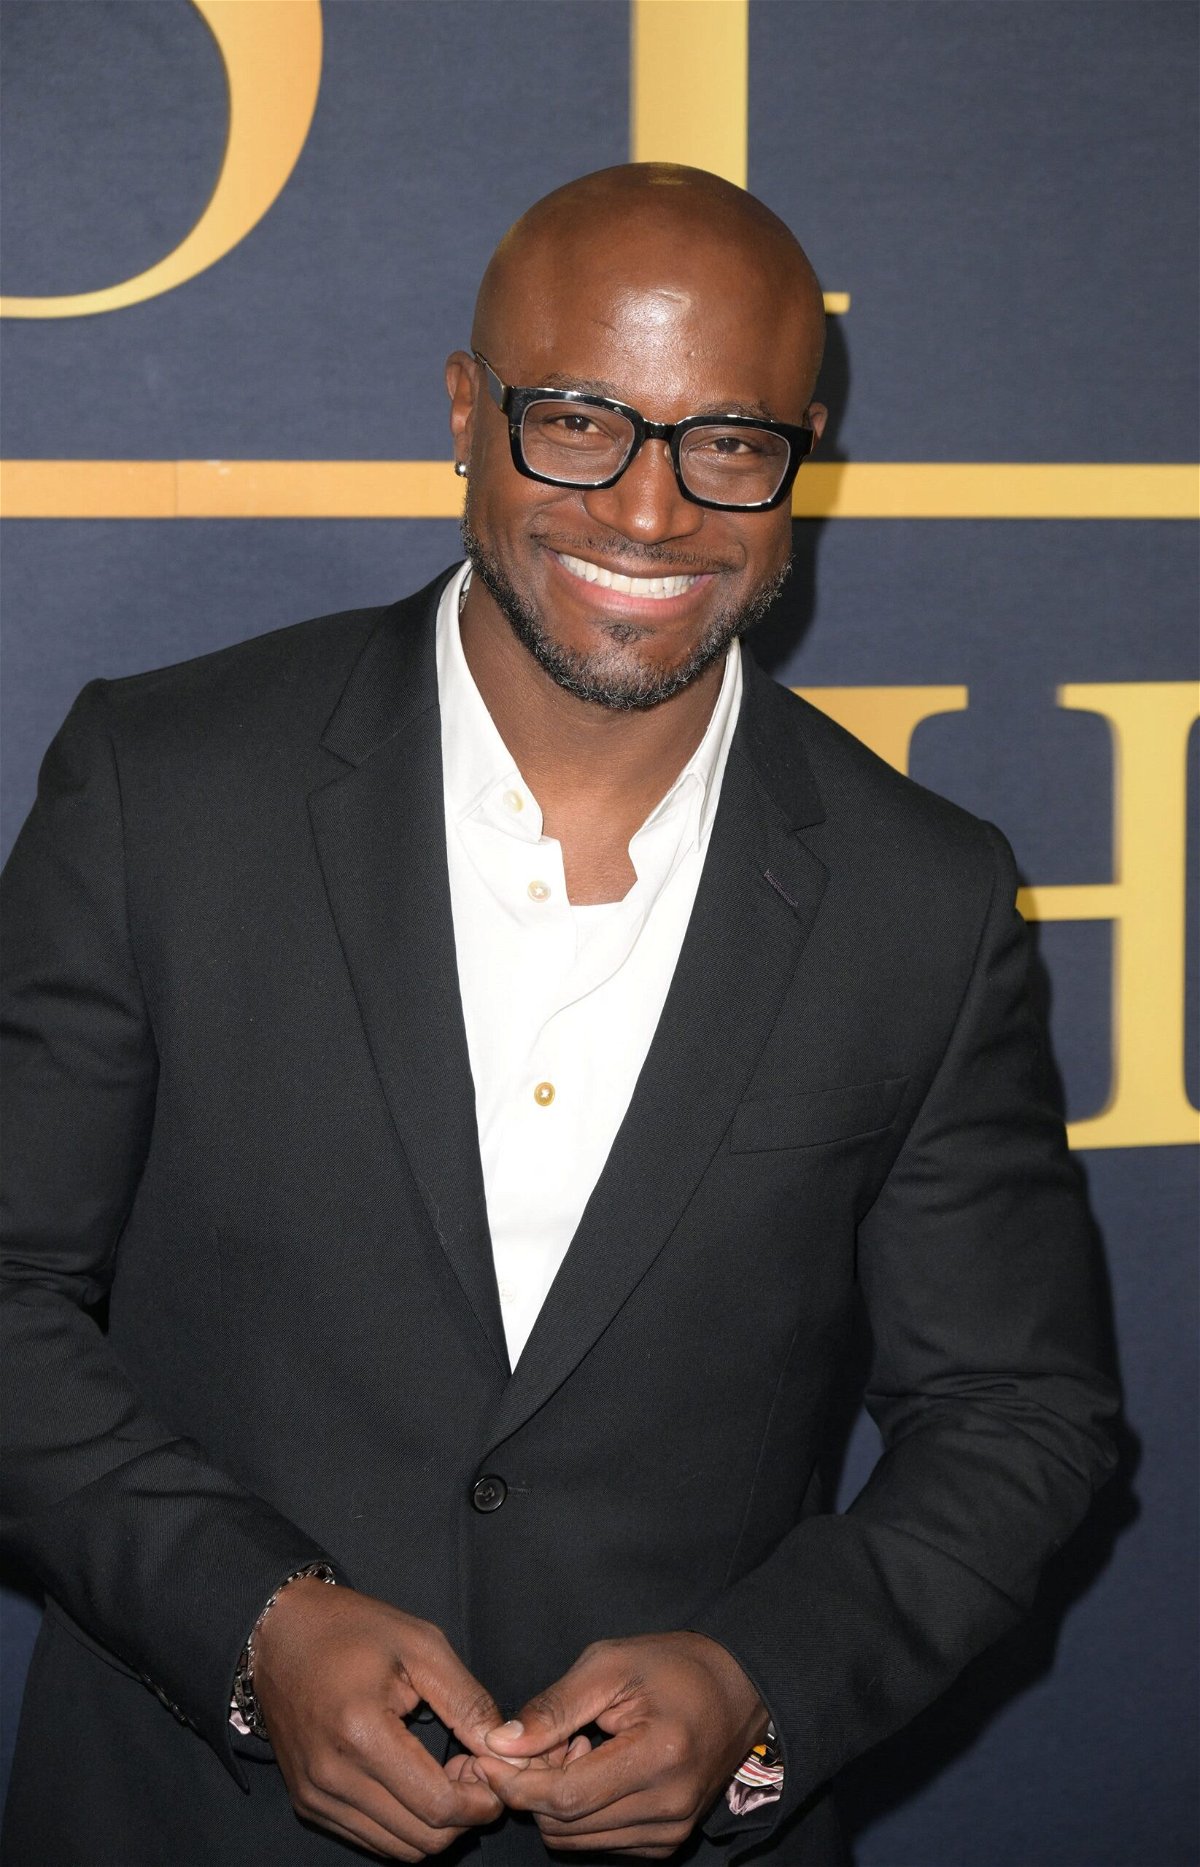 <i>ROBYN BECK/AFP/AFP via Getty Images</i><br/>Taye Diggs is happy to talk about love stories